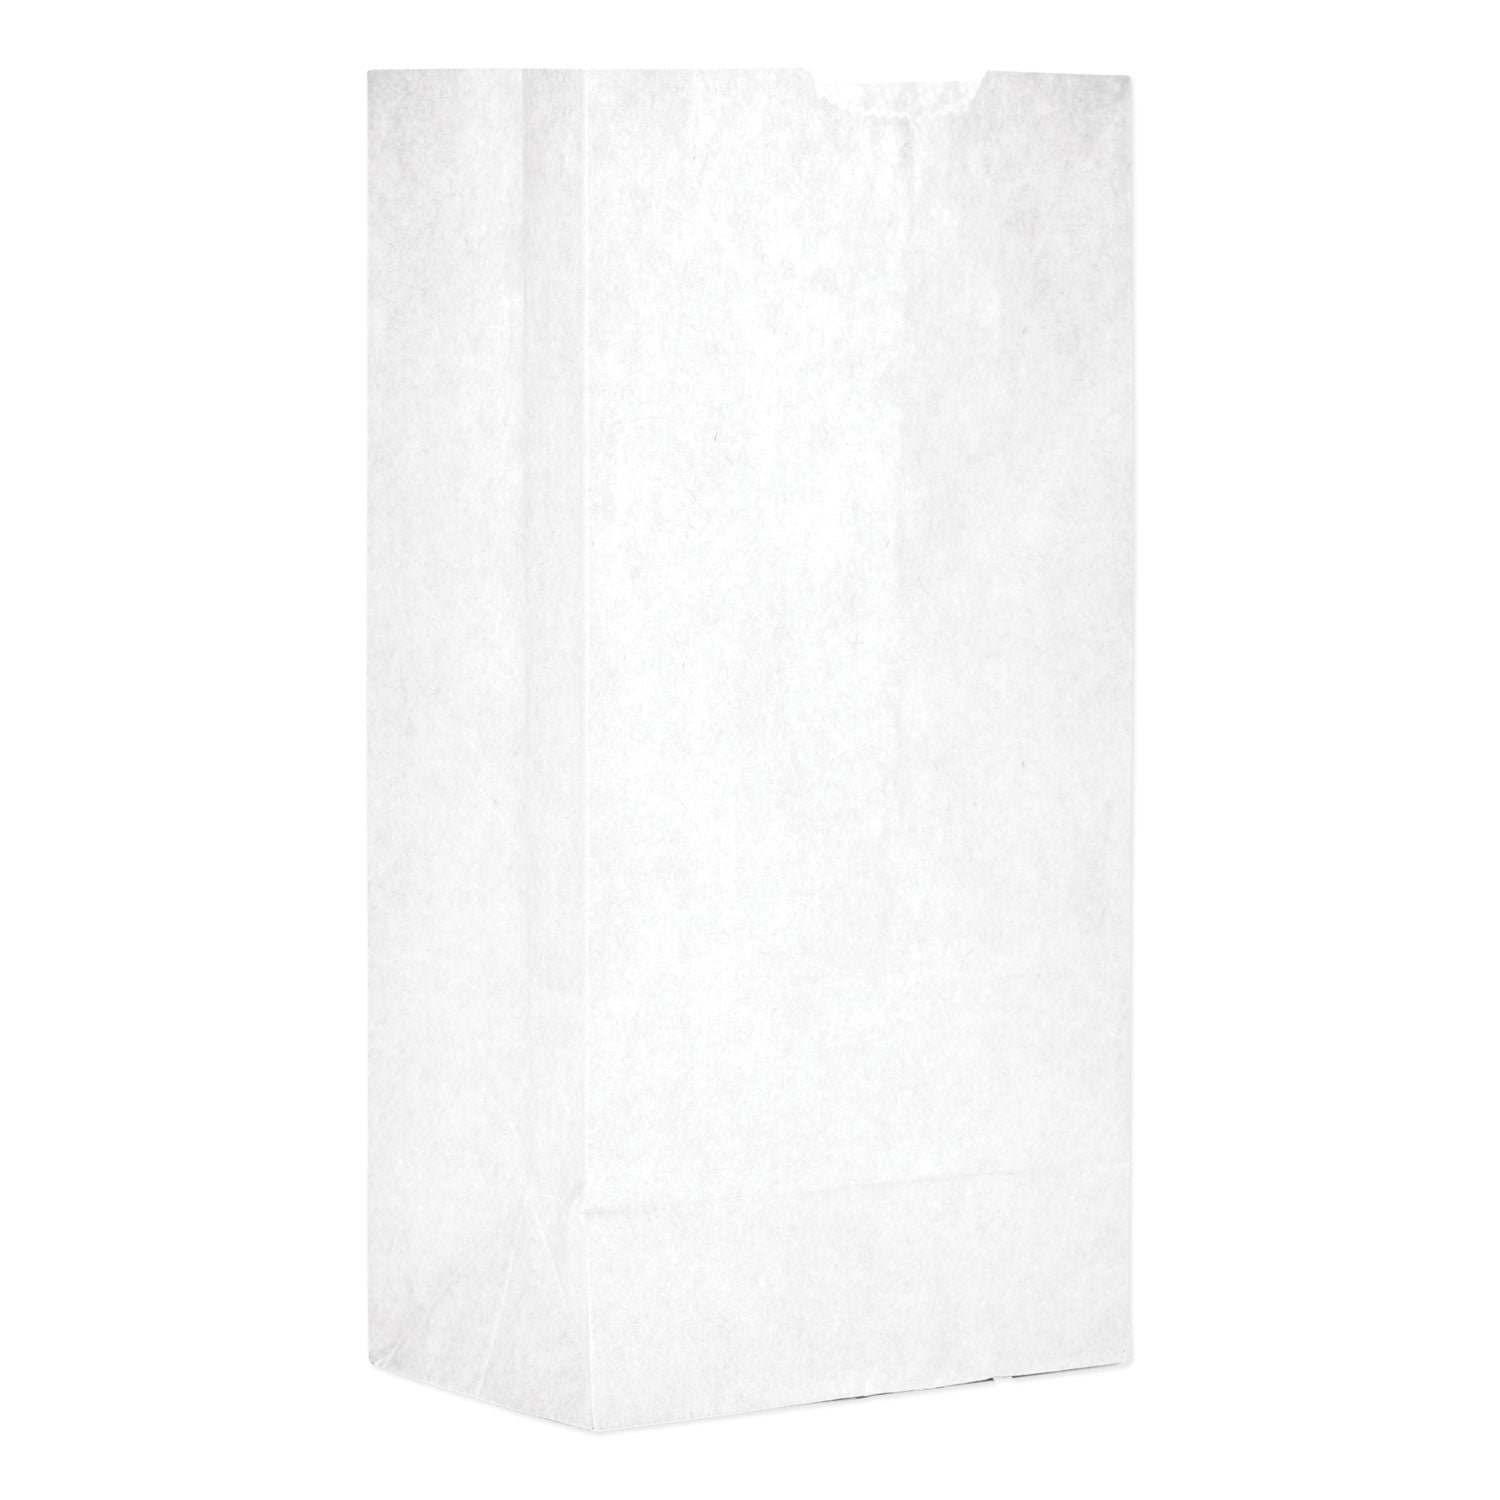 grocery-paper-bags-30-lb-capacity-#4-5-x-333-x-975-white-500-bags_baggw4500 - 1